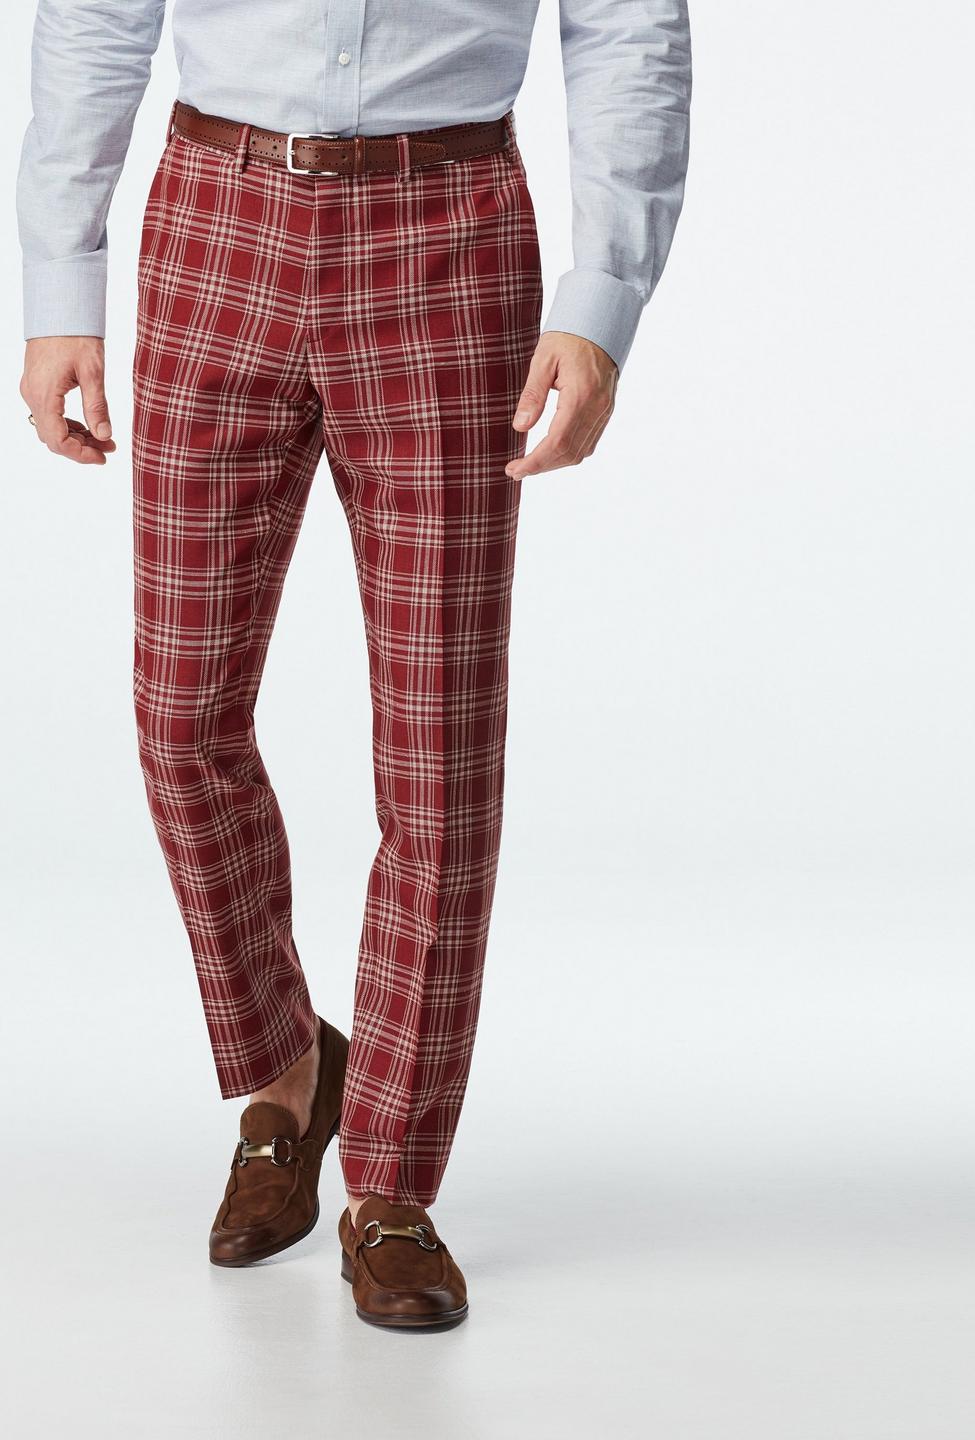 Red pants - Stone Plaid Design from Seasonal Indochino Collection